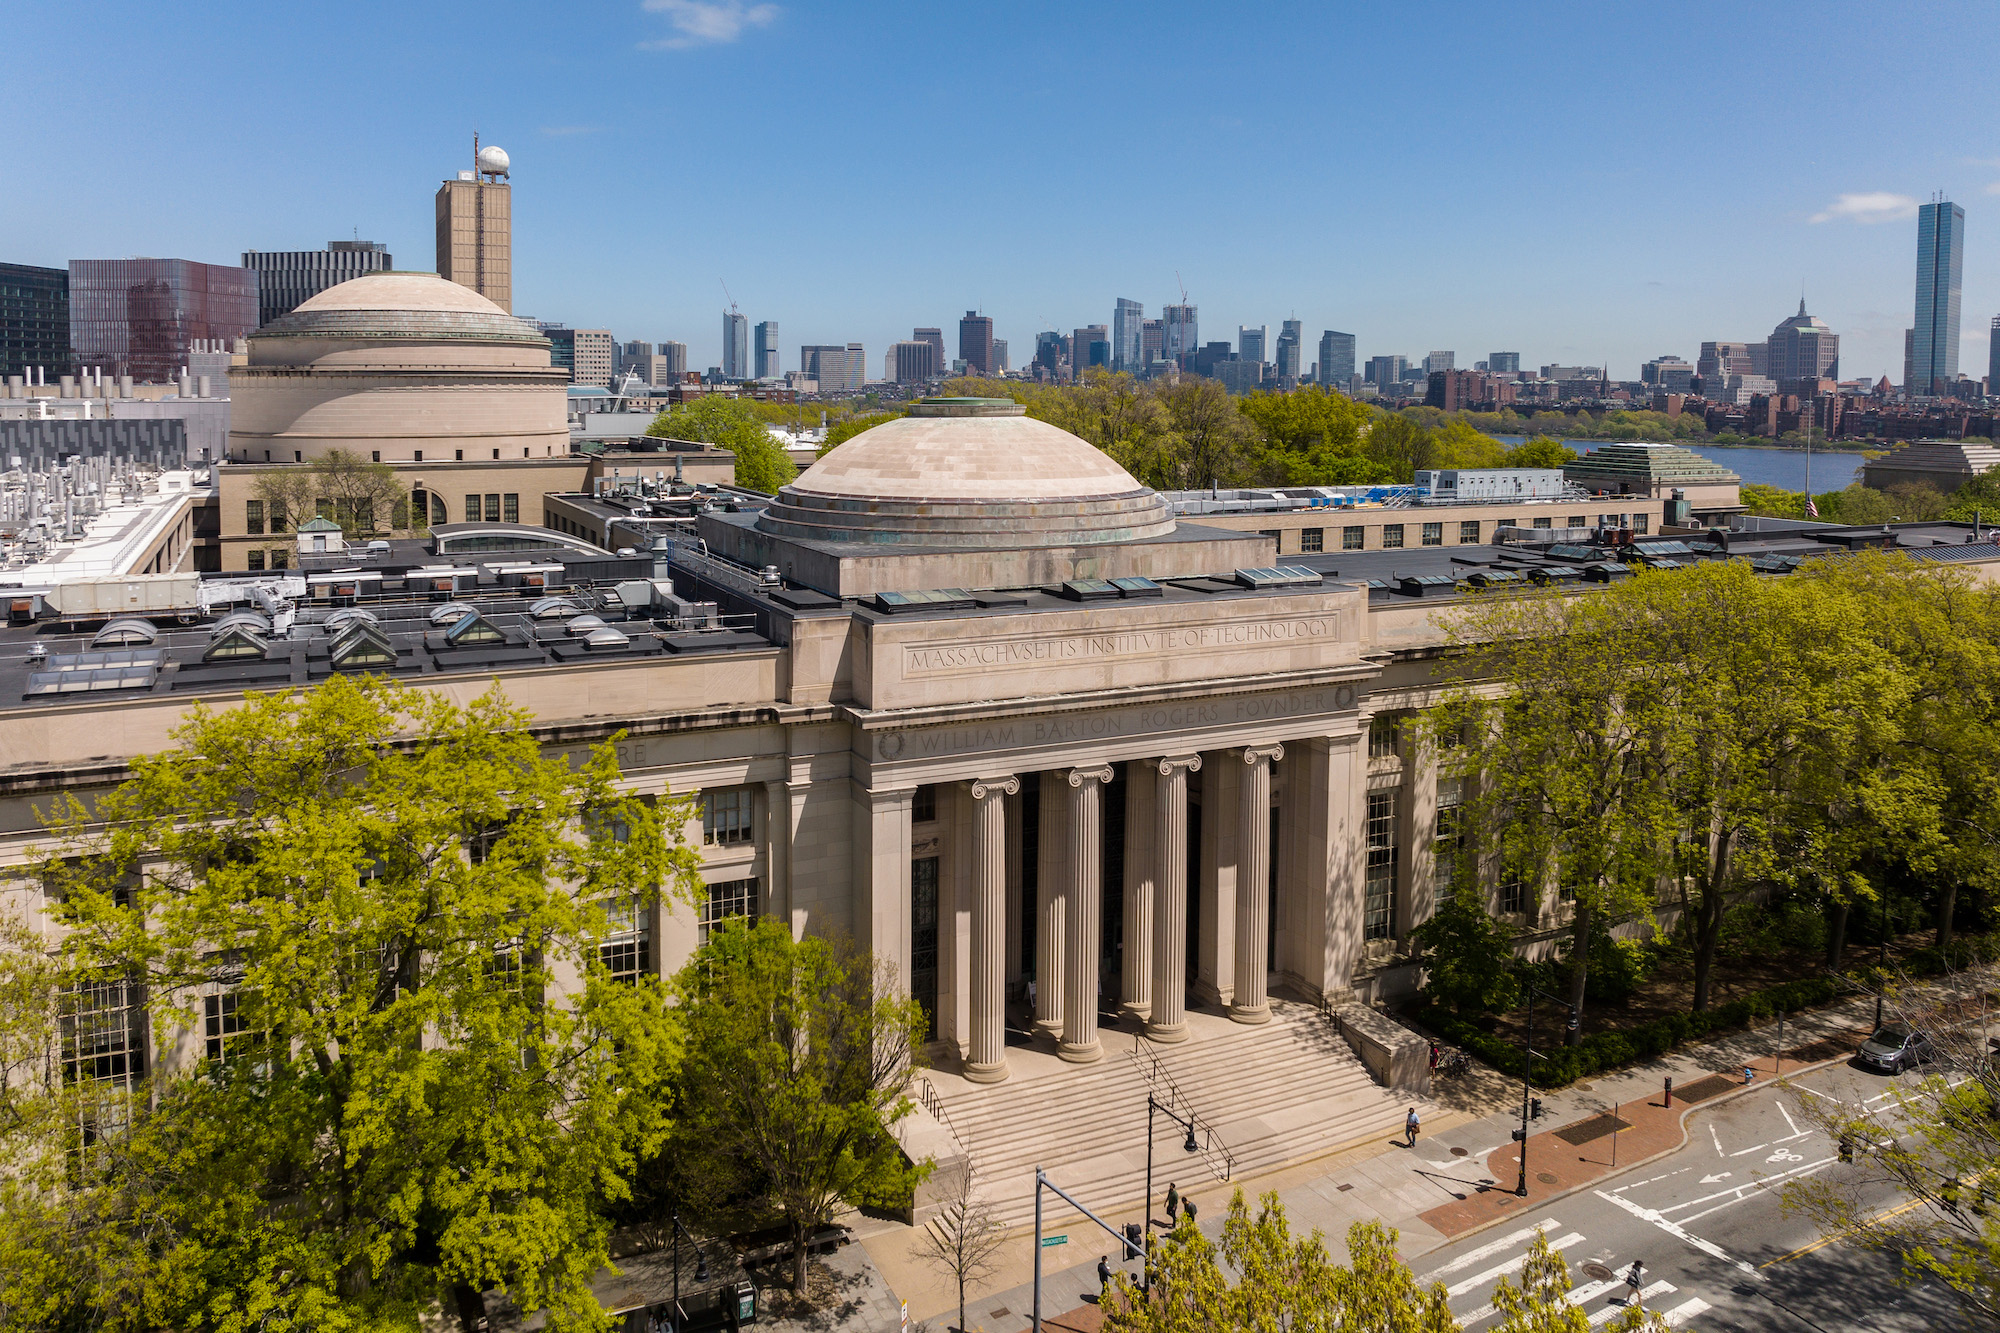 3 Questions: New MIT major and its role in fighting climate change